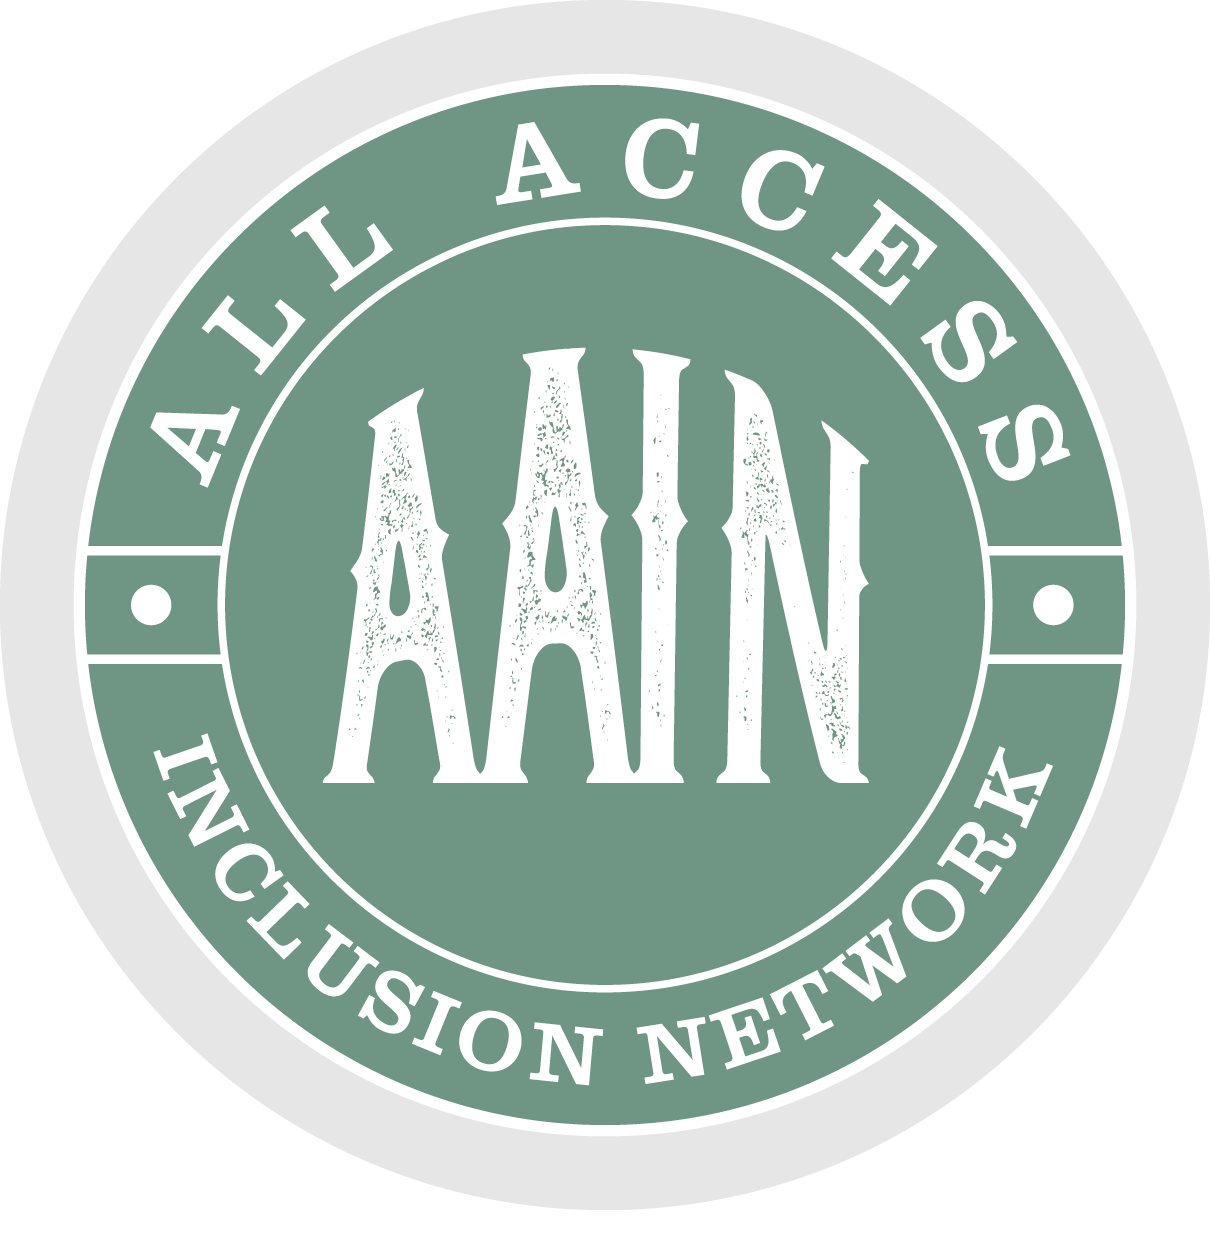 All Access Inclusion Network AAIN in white letters on green circle background